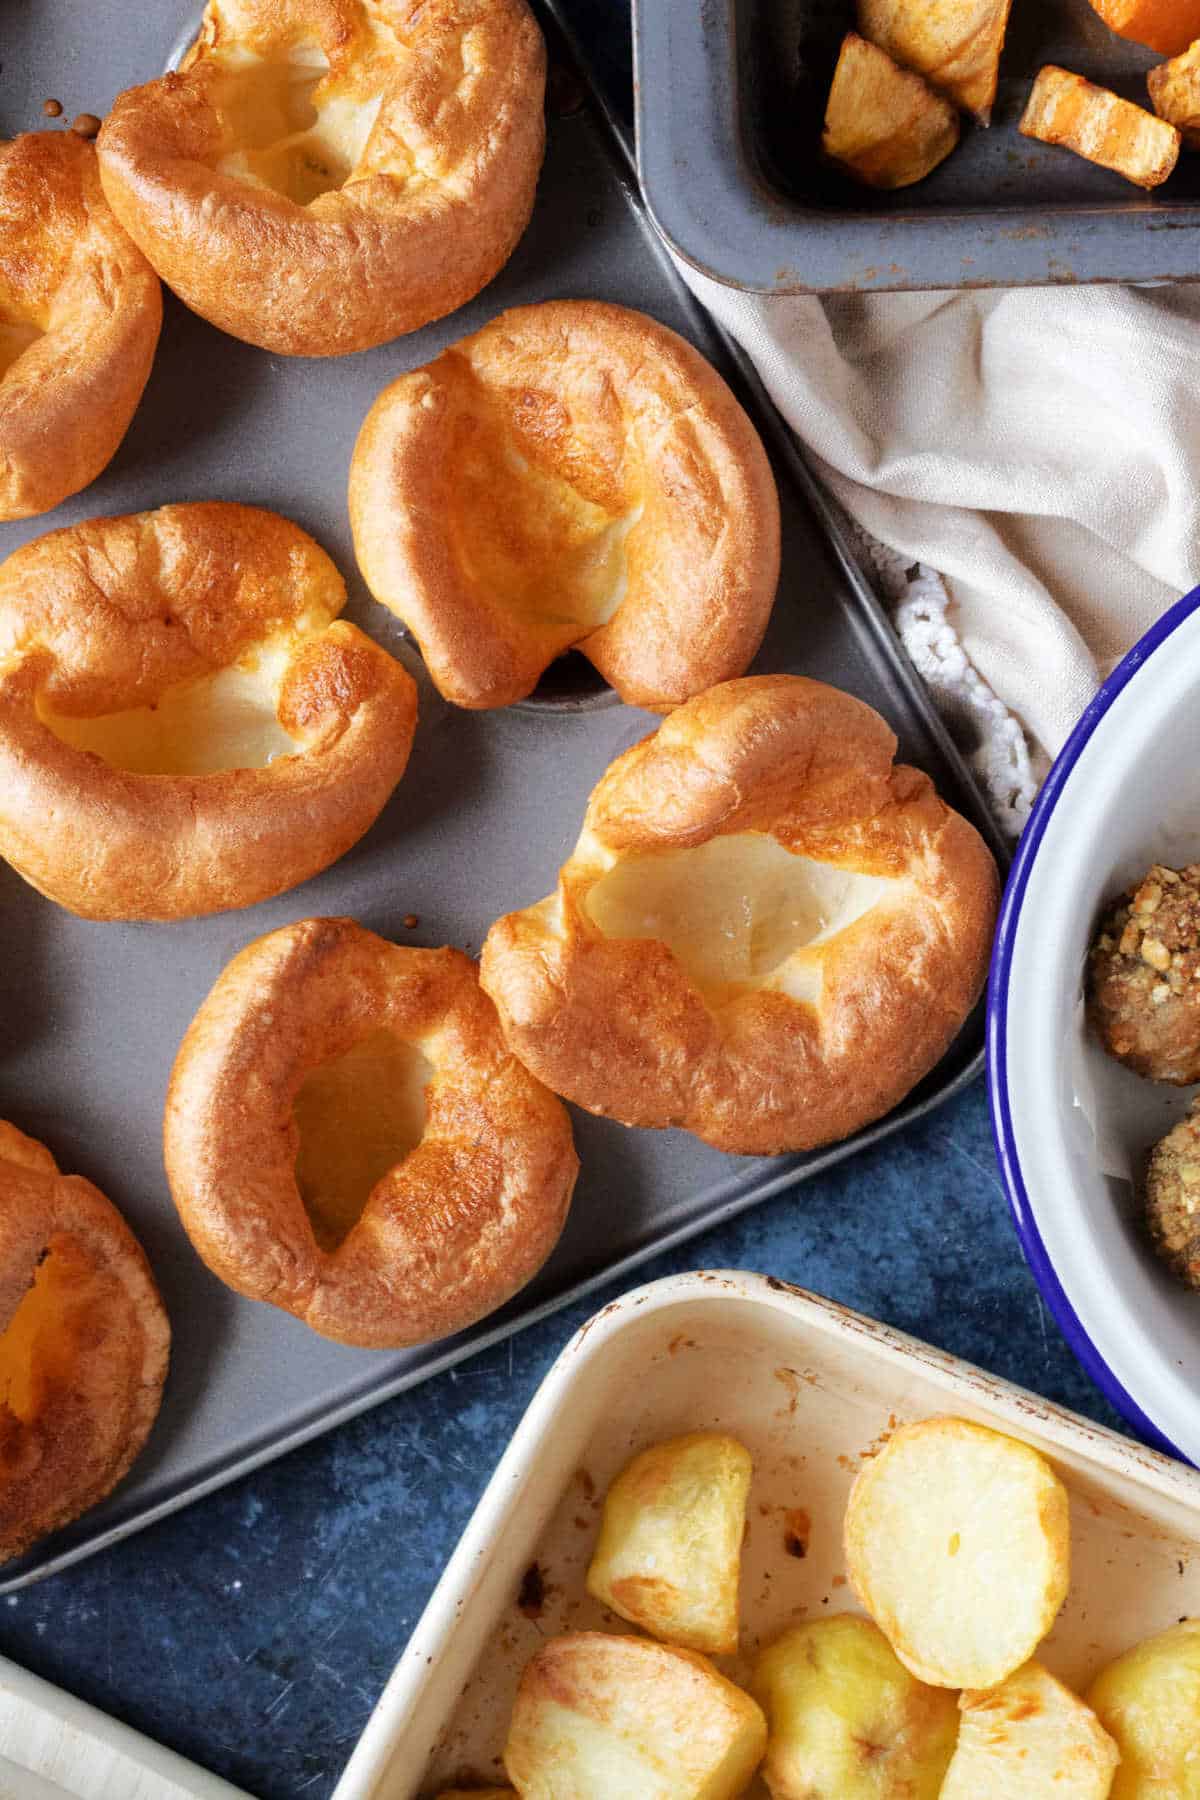 Yorkshire puddings, stuffing balls and potatoes.